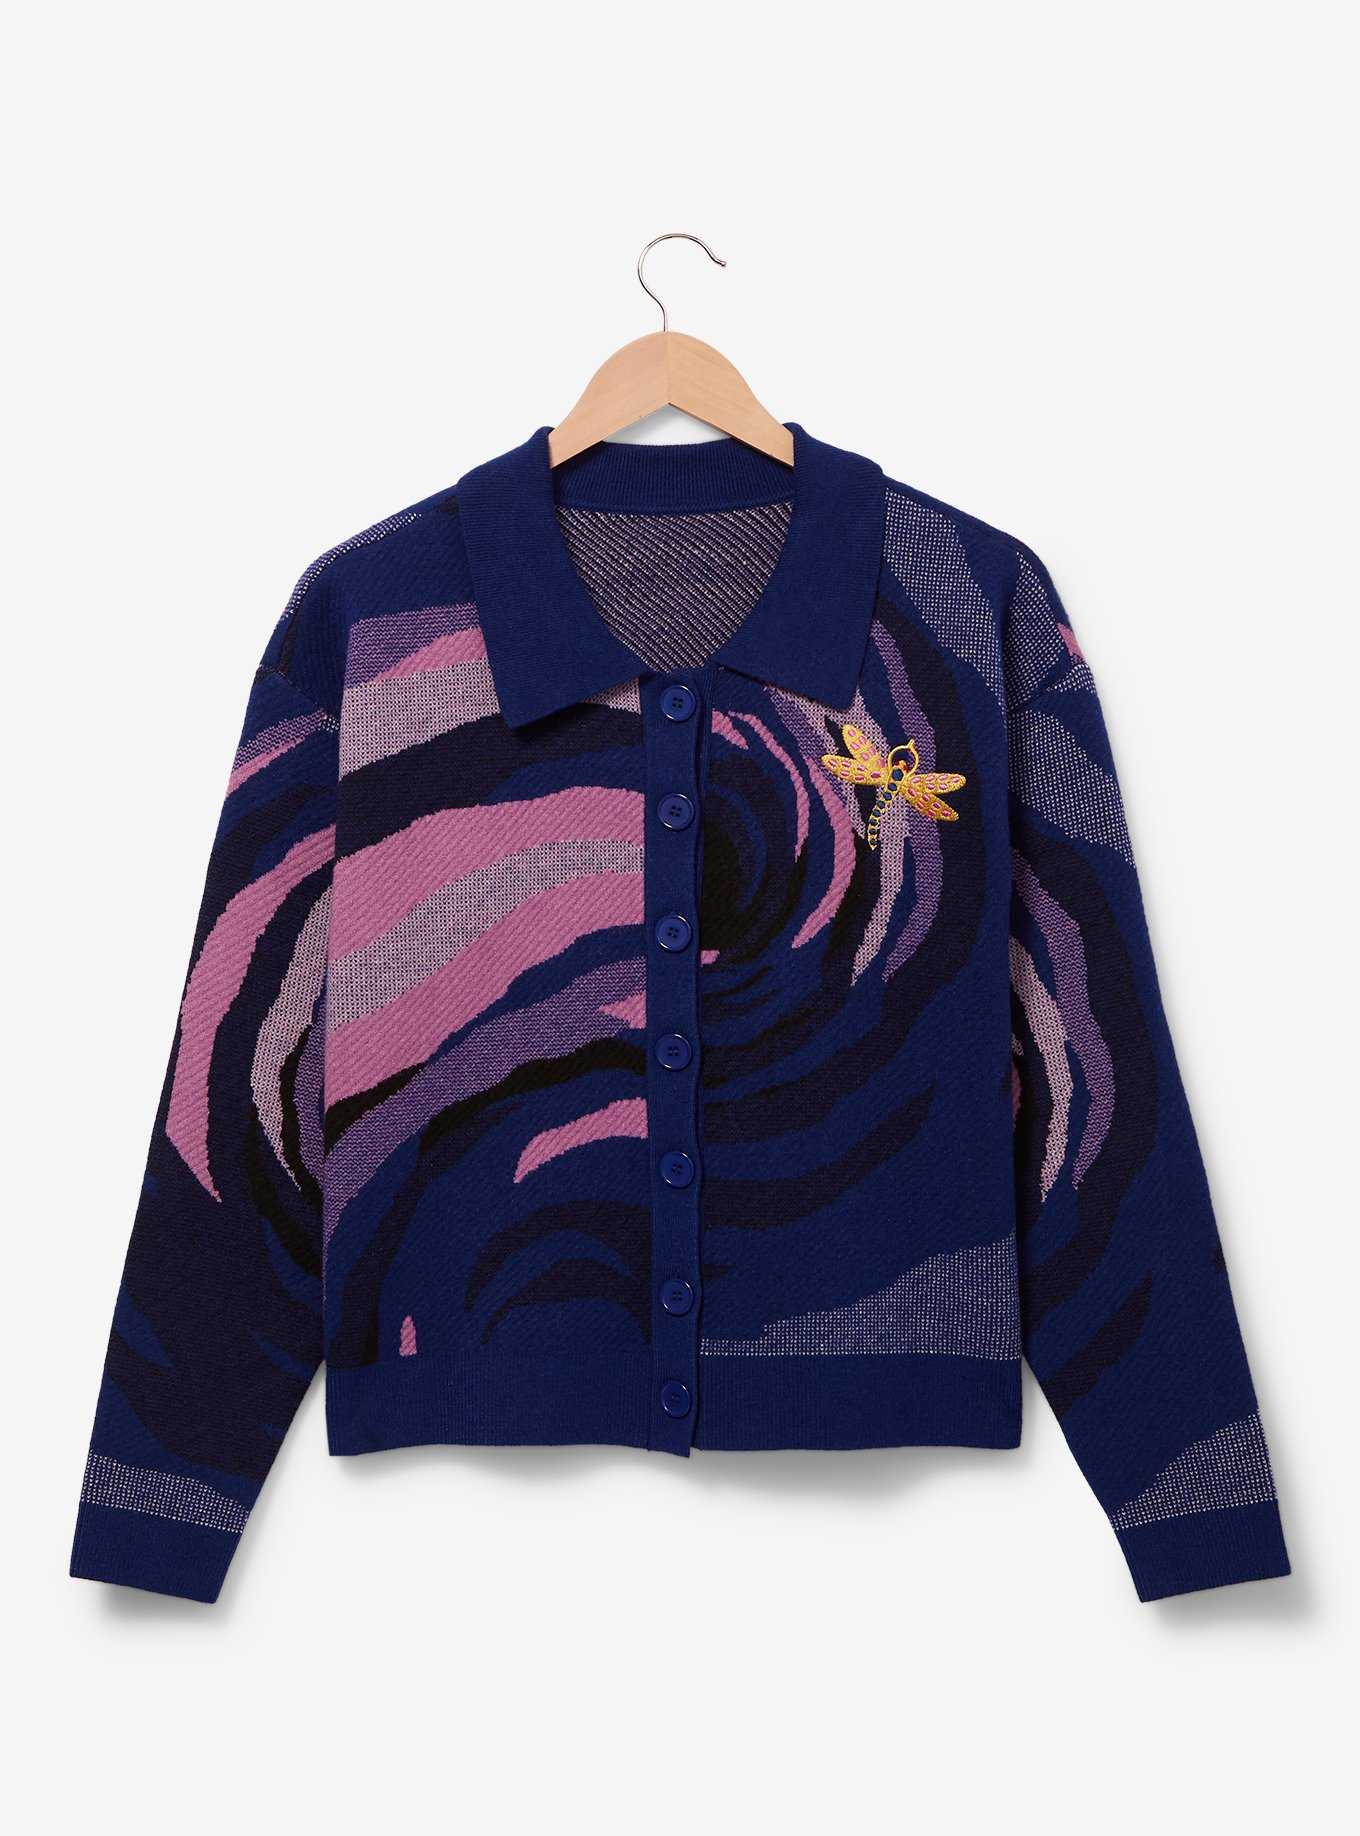 Coraline Dragonfly Collared Women's Cardigan - BoxLunch Exclusive, , hi-res